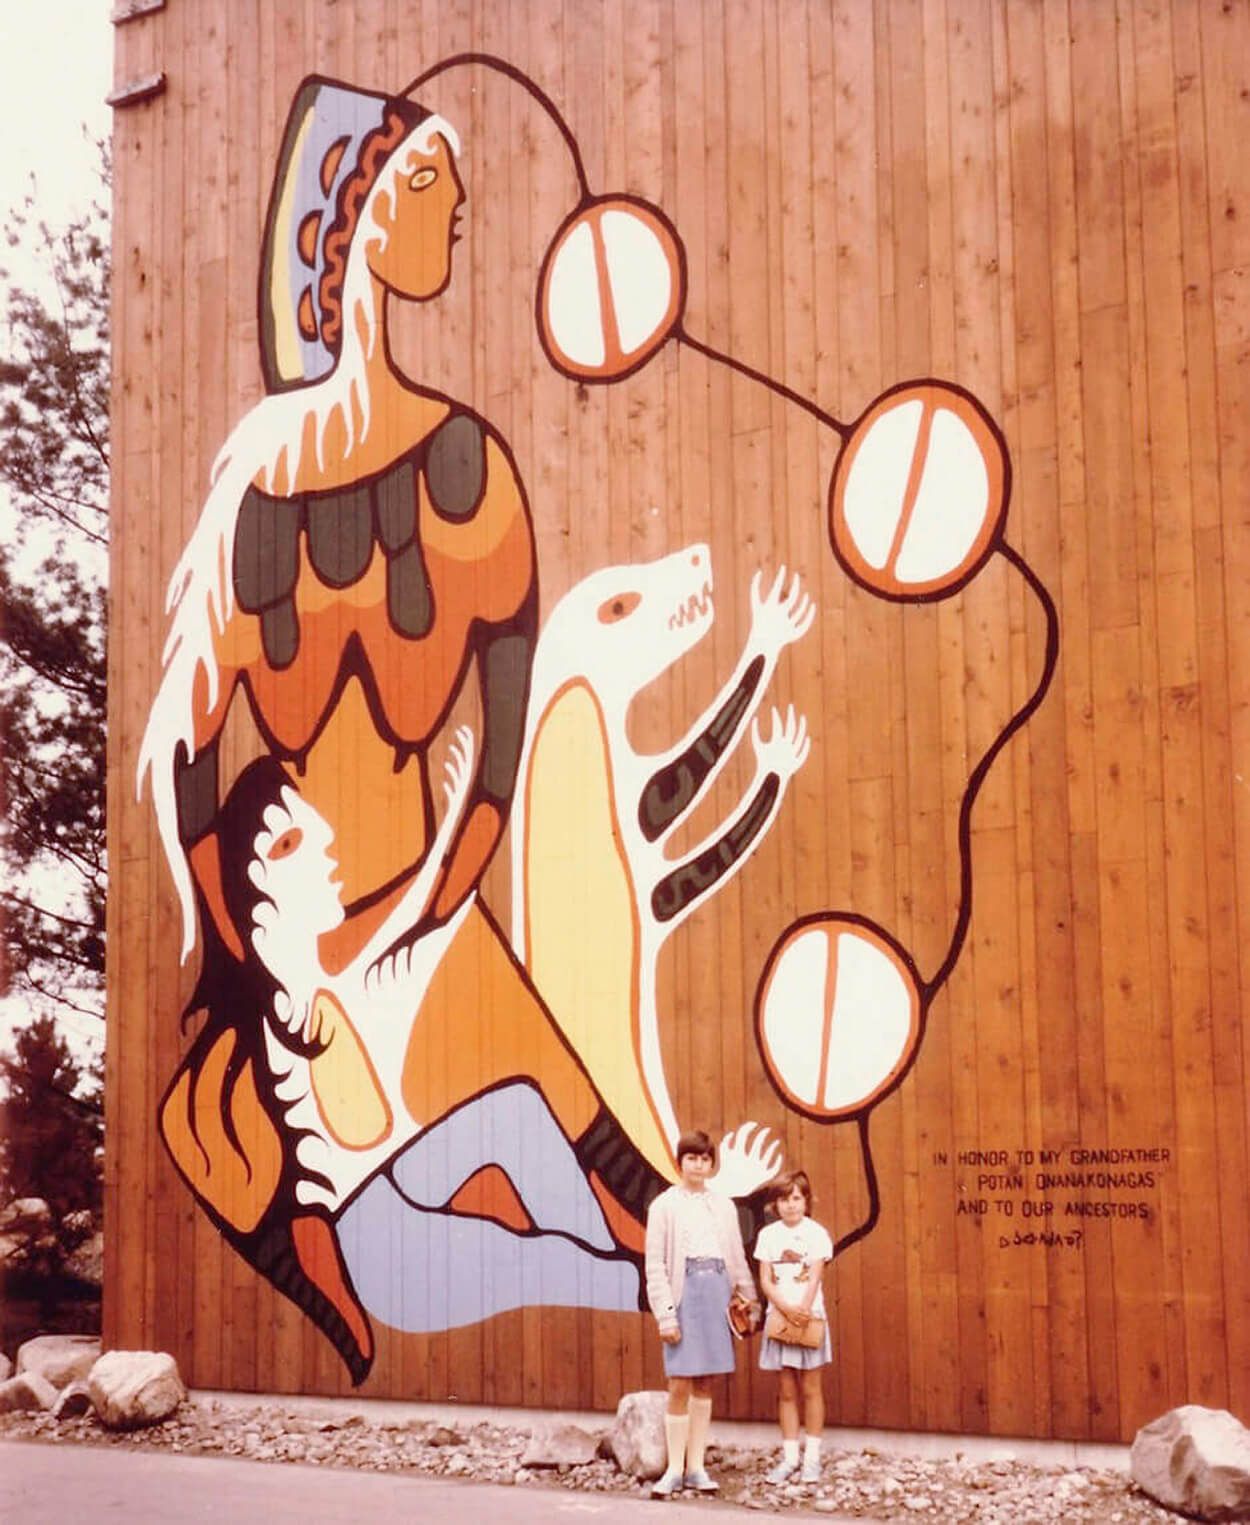 Carl Ray helped Norval Morrisseau paint this Expo 67 mural.